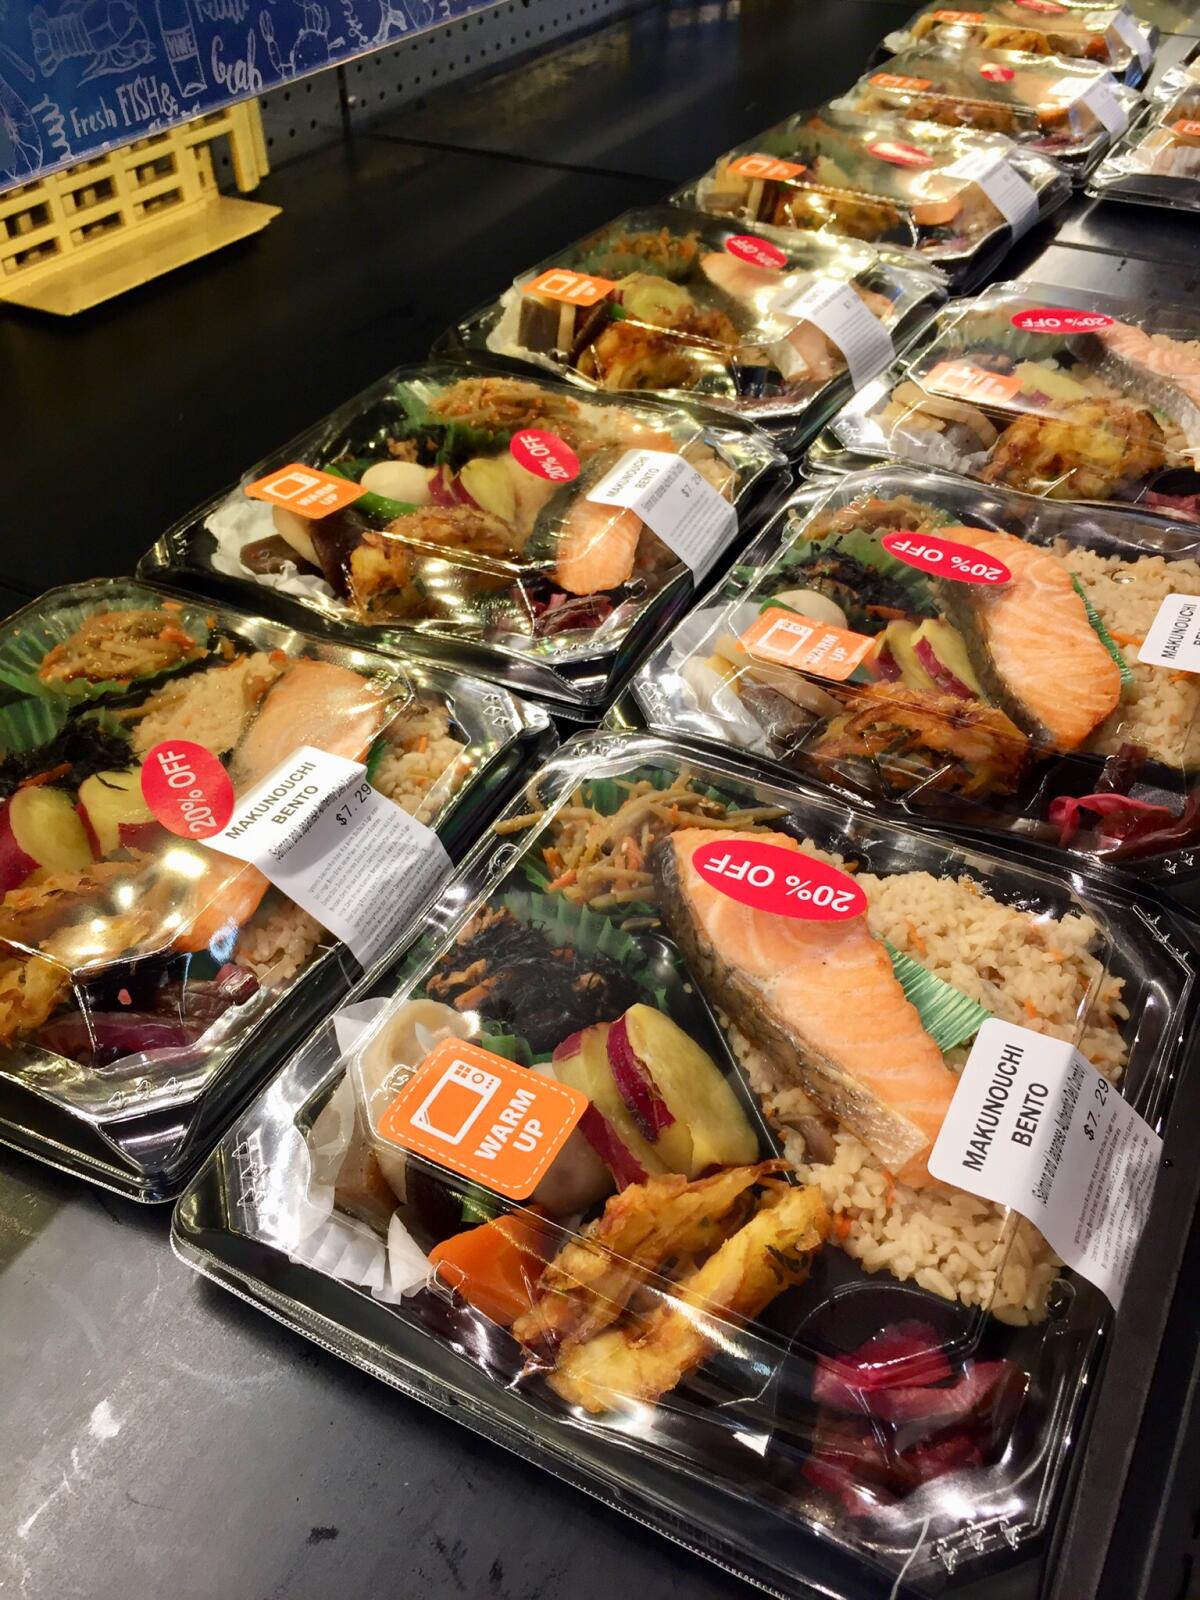 You can get 20% off Tokyo Central's bento and sushi boxes after 7 p.m. daily.